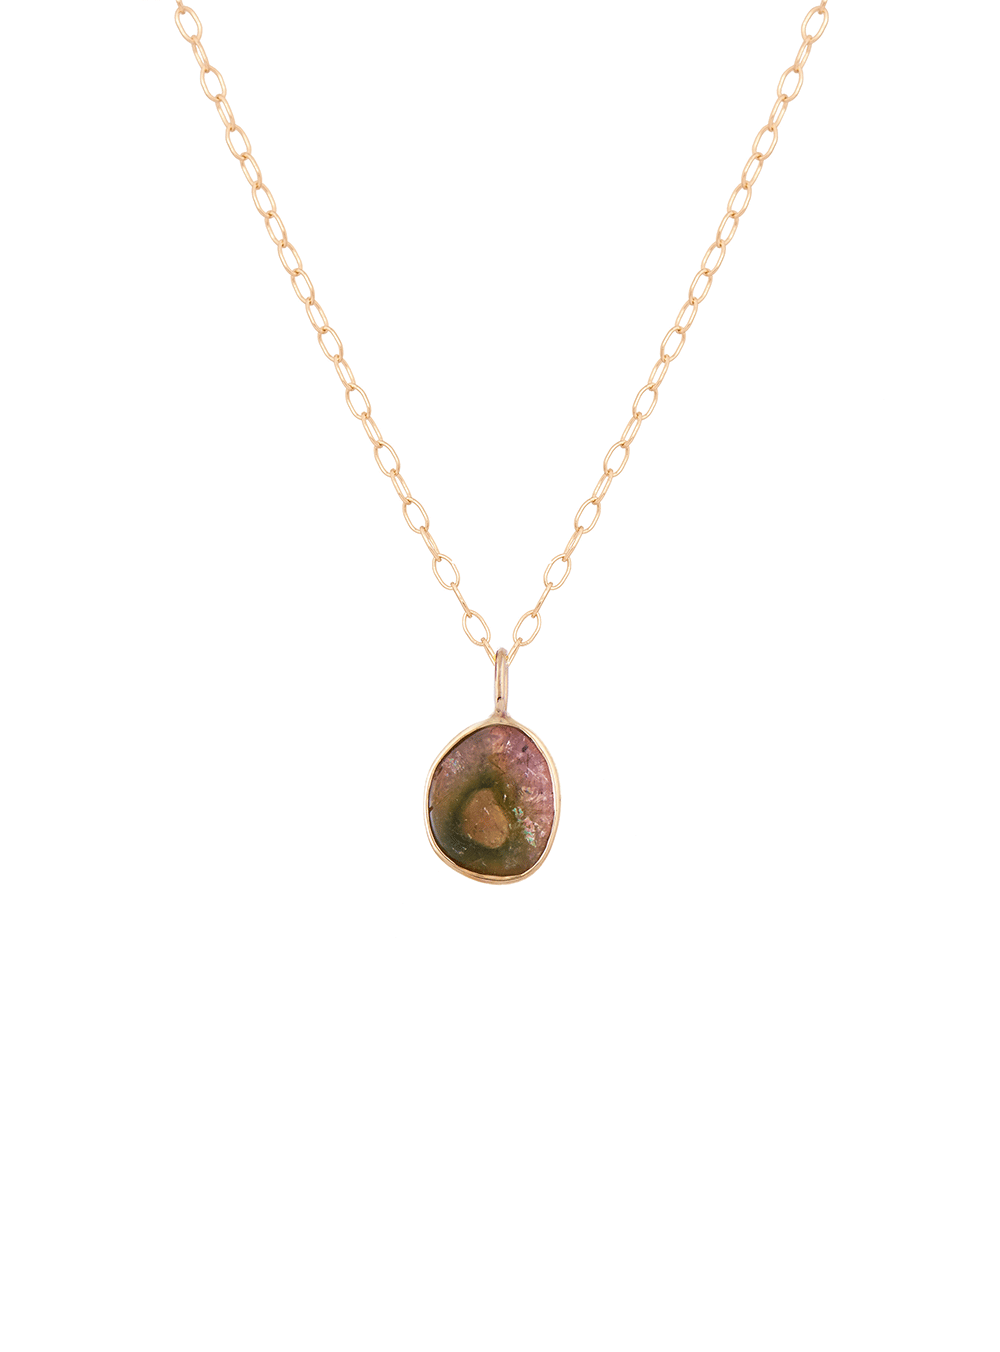 YELLOW GOLD PENDANT NECKLACE